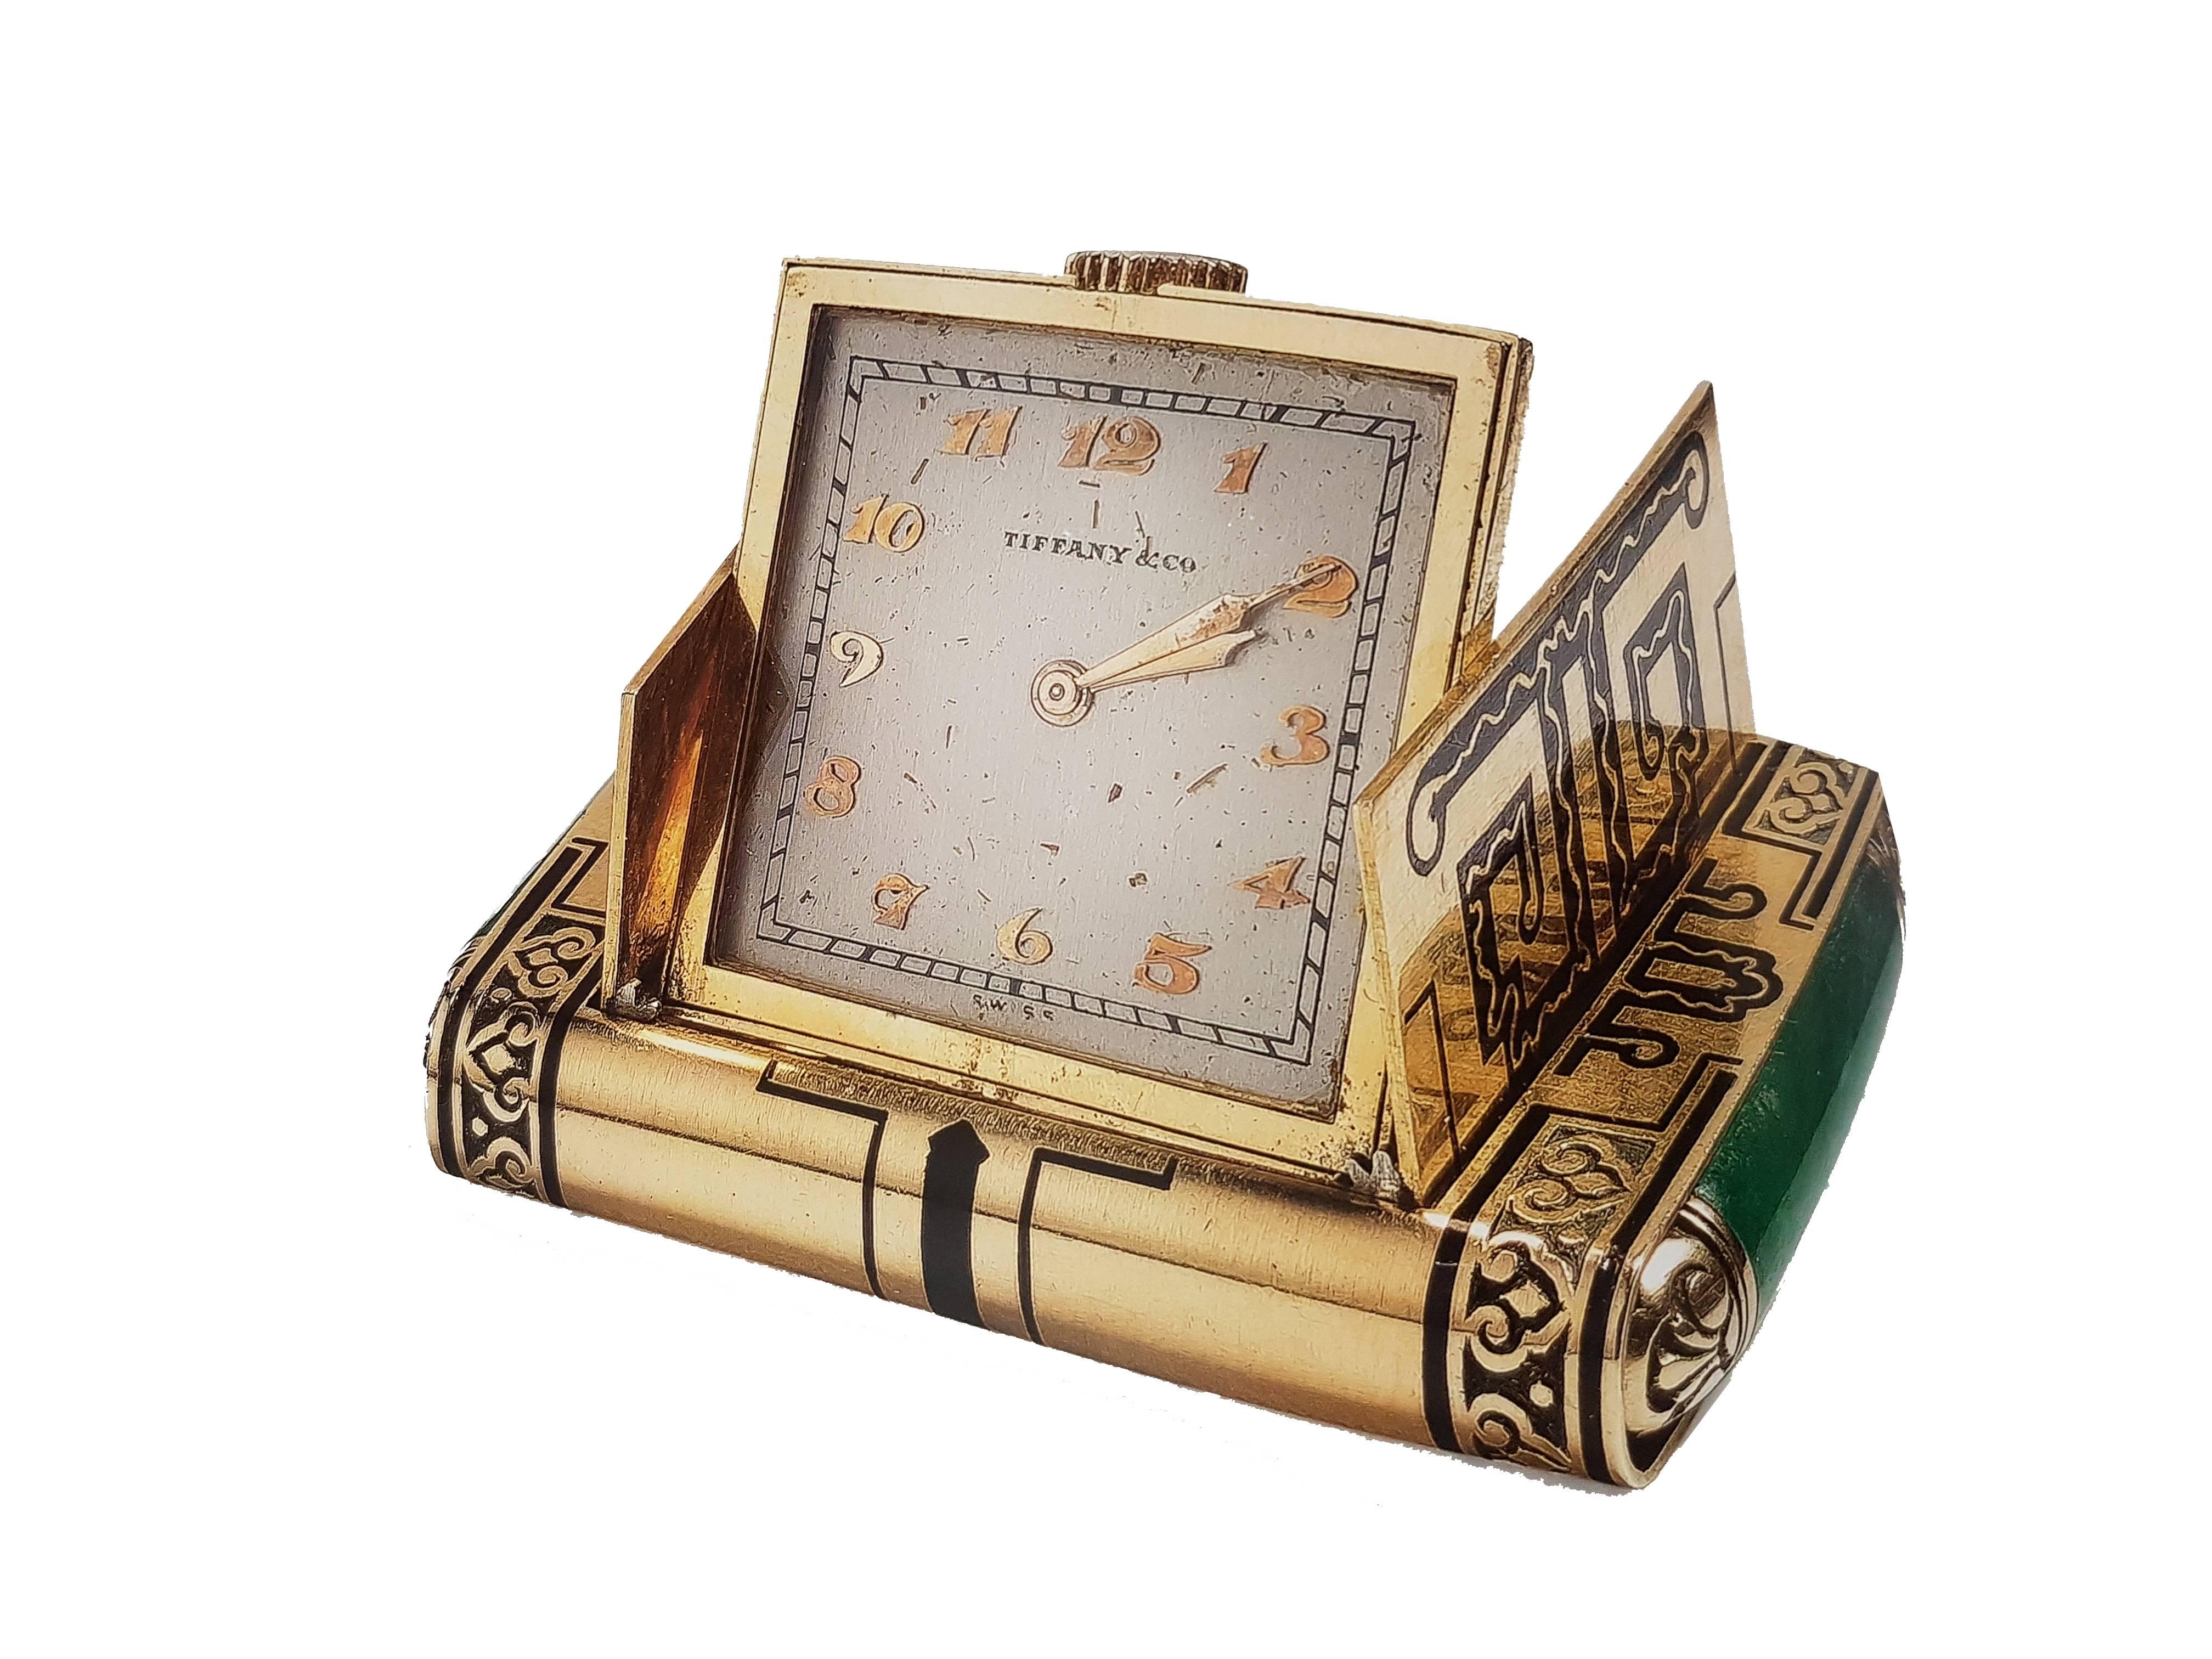 Gold, Enamel and Hardstone Travel Watch, Tiffany & Co., 20th Century For Sale 3